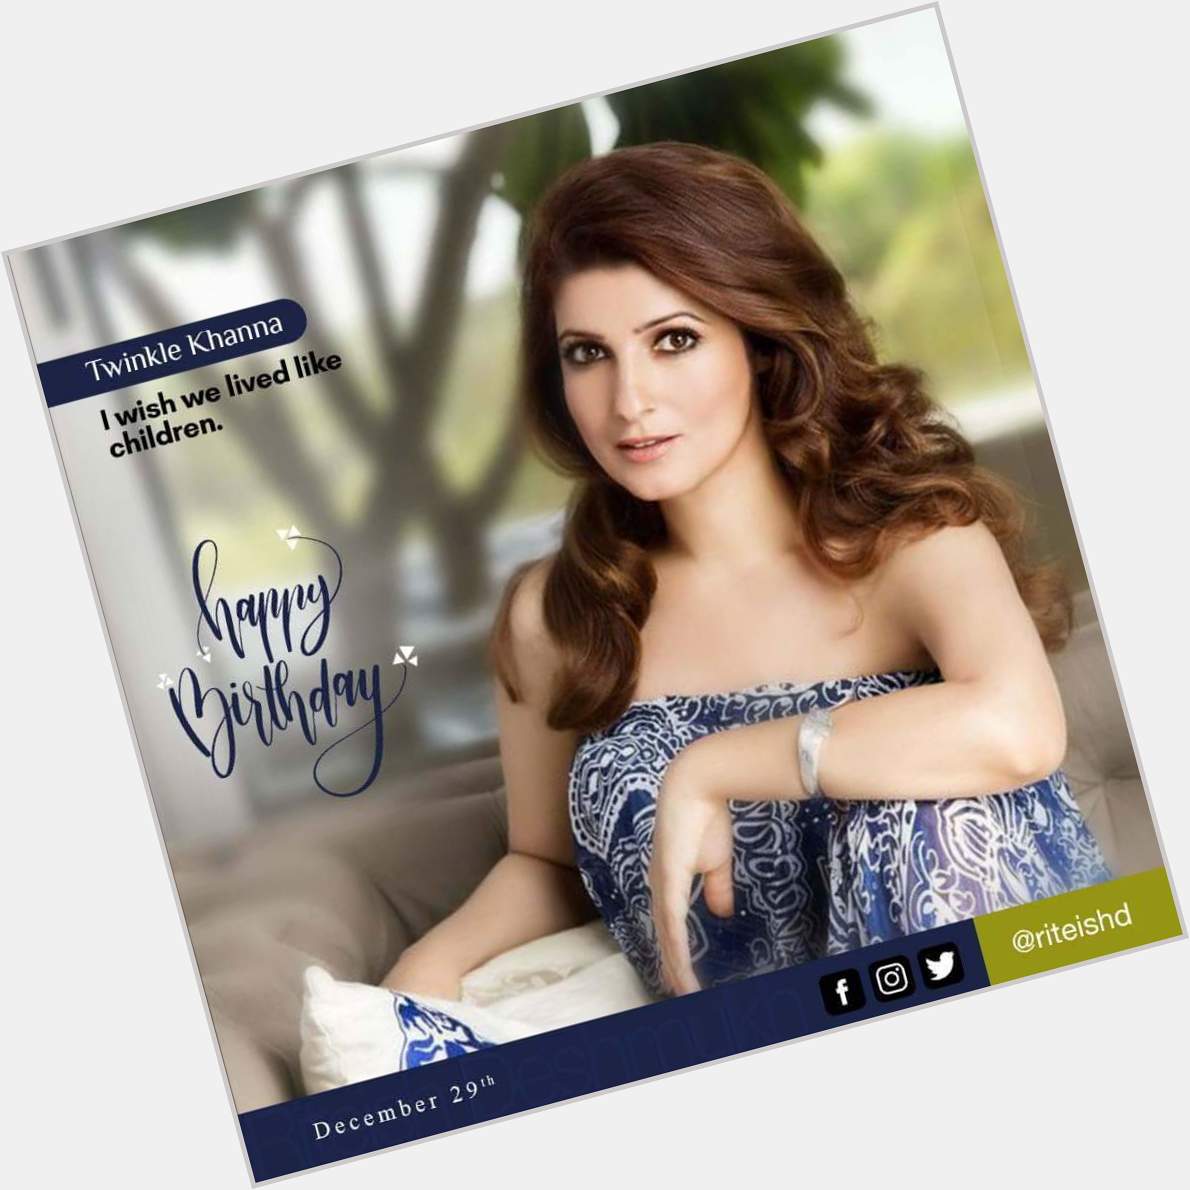 Wishing the extreme witty & beautiful Twinkle Khanna a very happy birthday ..  have a great great one... 